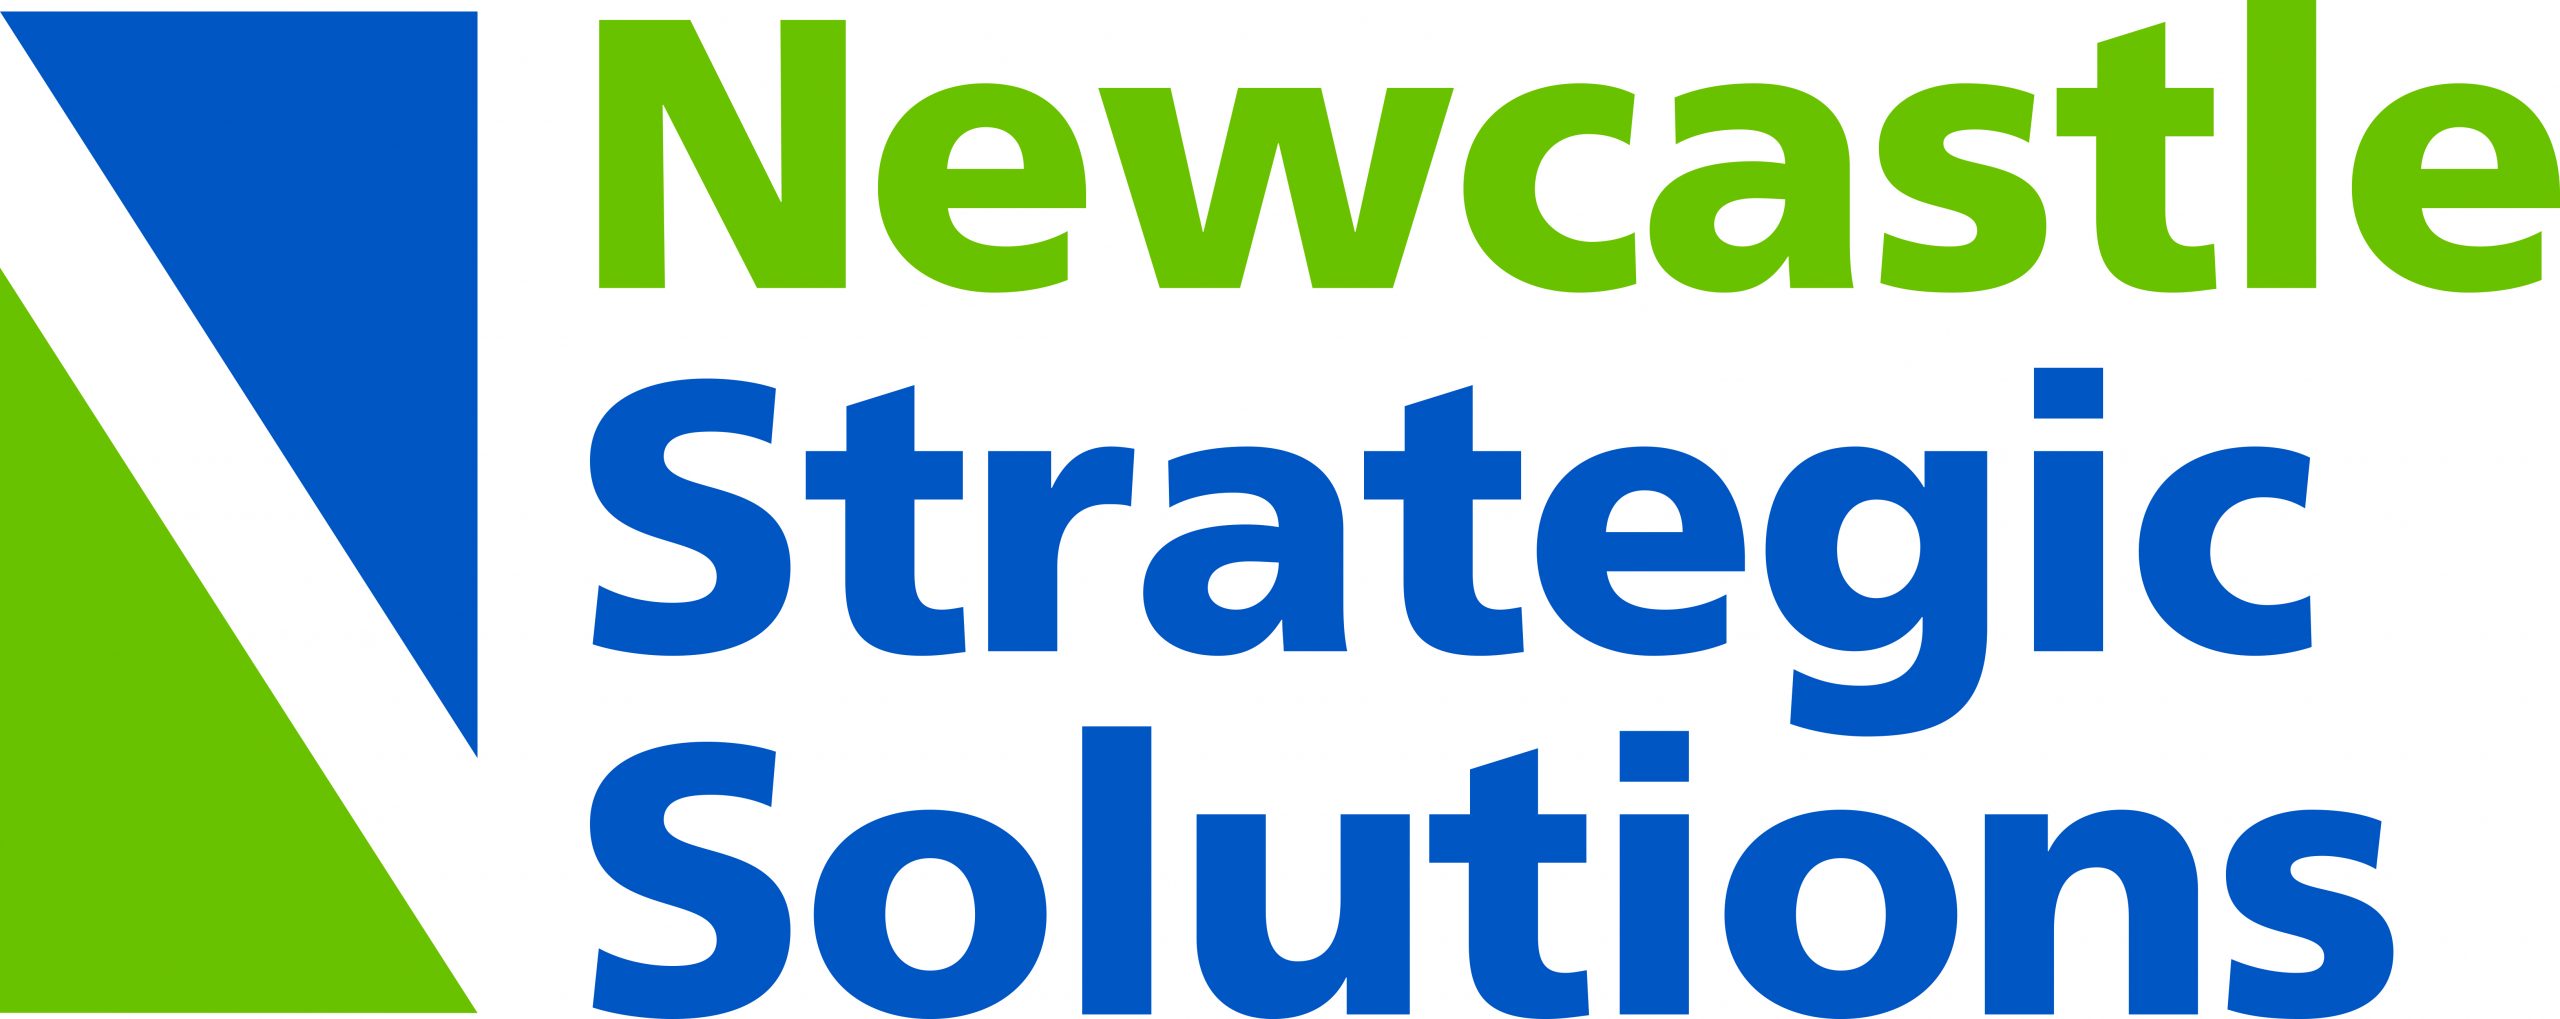 FinTech North Partners with Newcastle Strategic Solutions